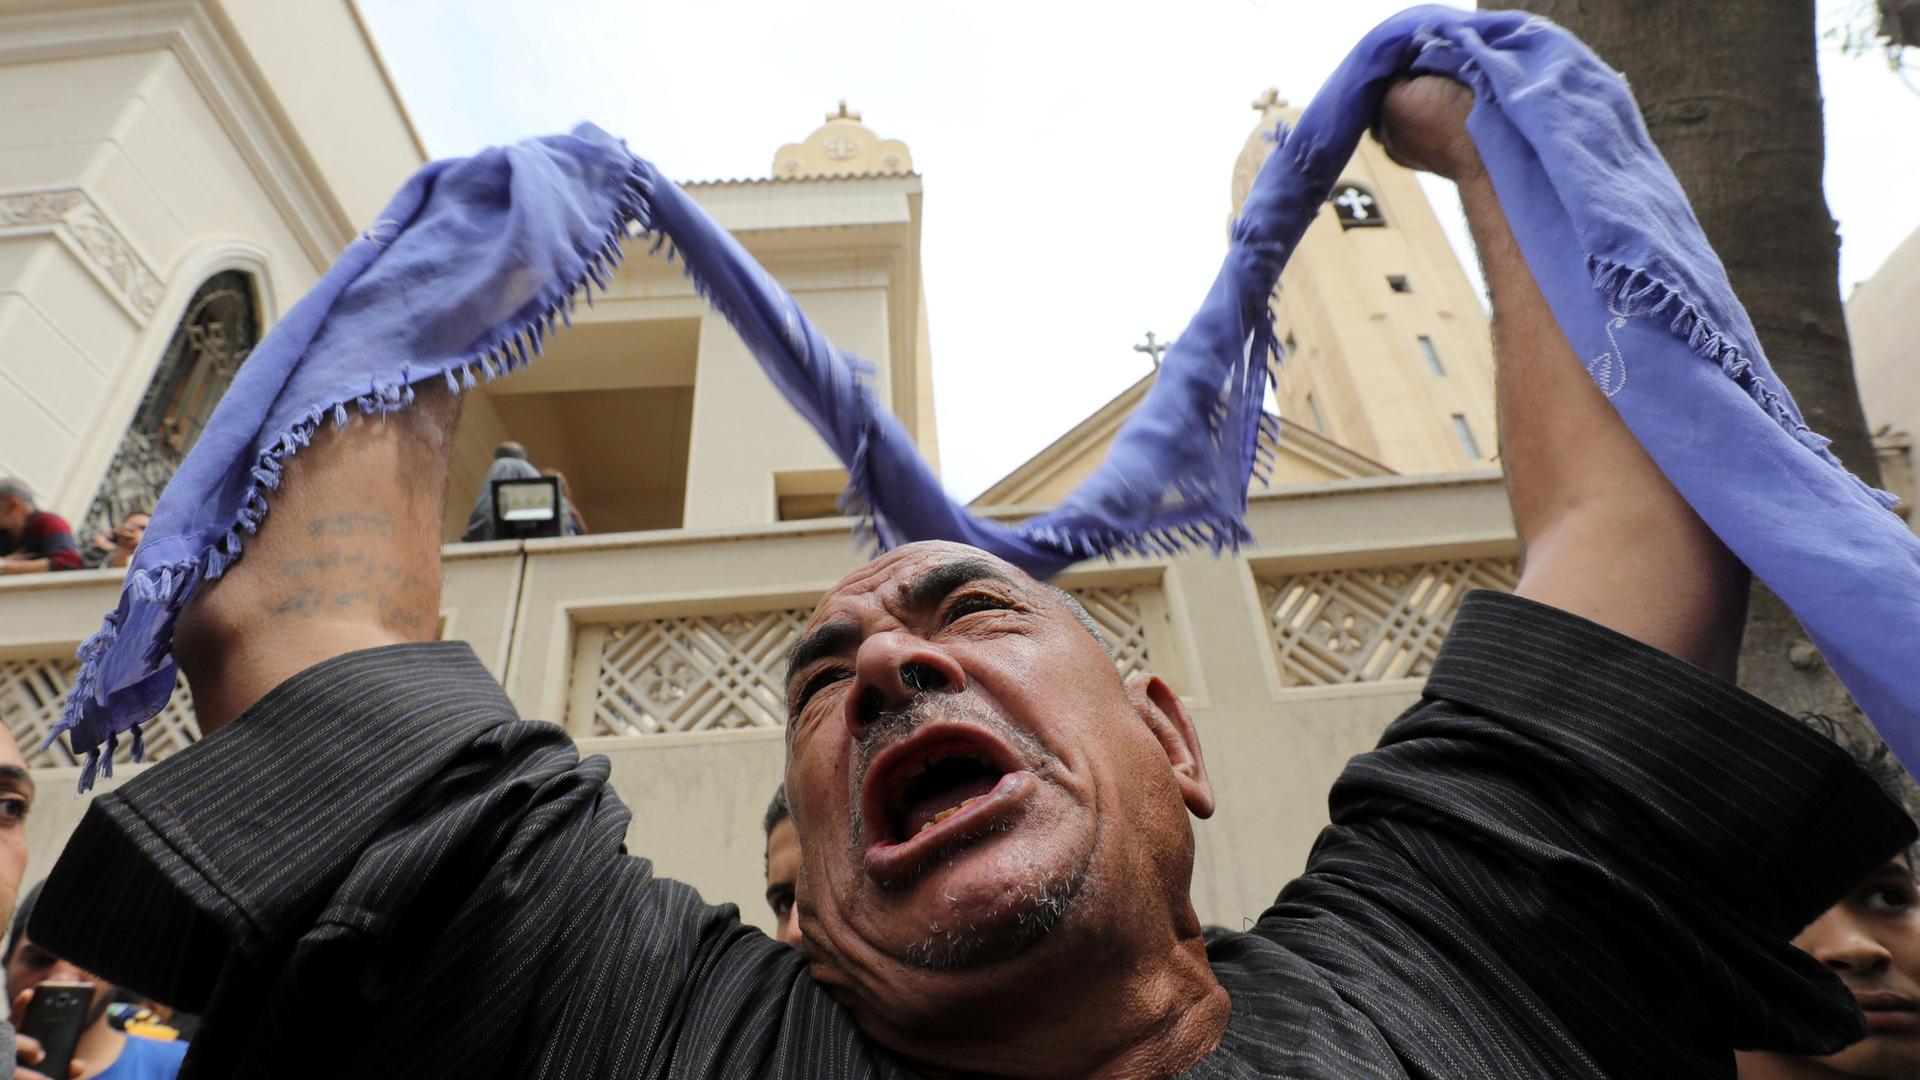 A relative of one of the victims reacts after a church explosion in Tanta, Egypt.